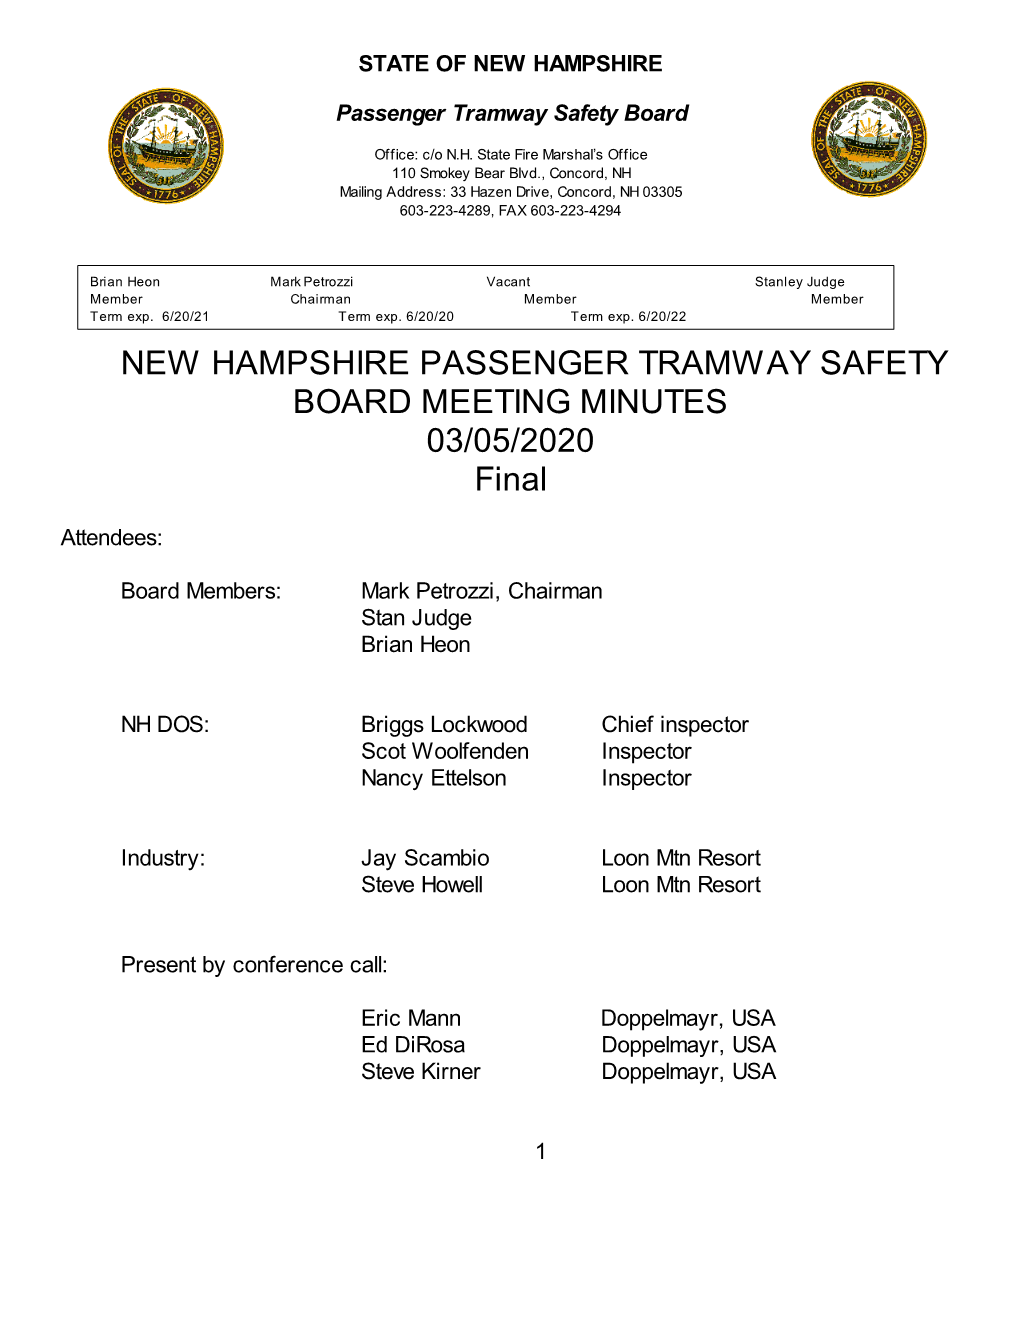 NEW HAMPSHIRE PASSENGER TRAMWAY SAFETY BOARD MEETING MINUTES 03/05/2020 Final